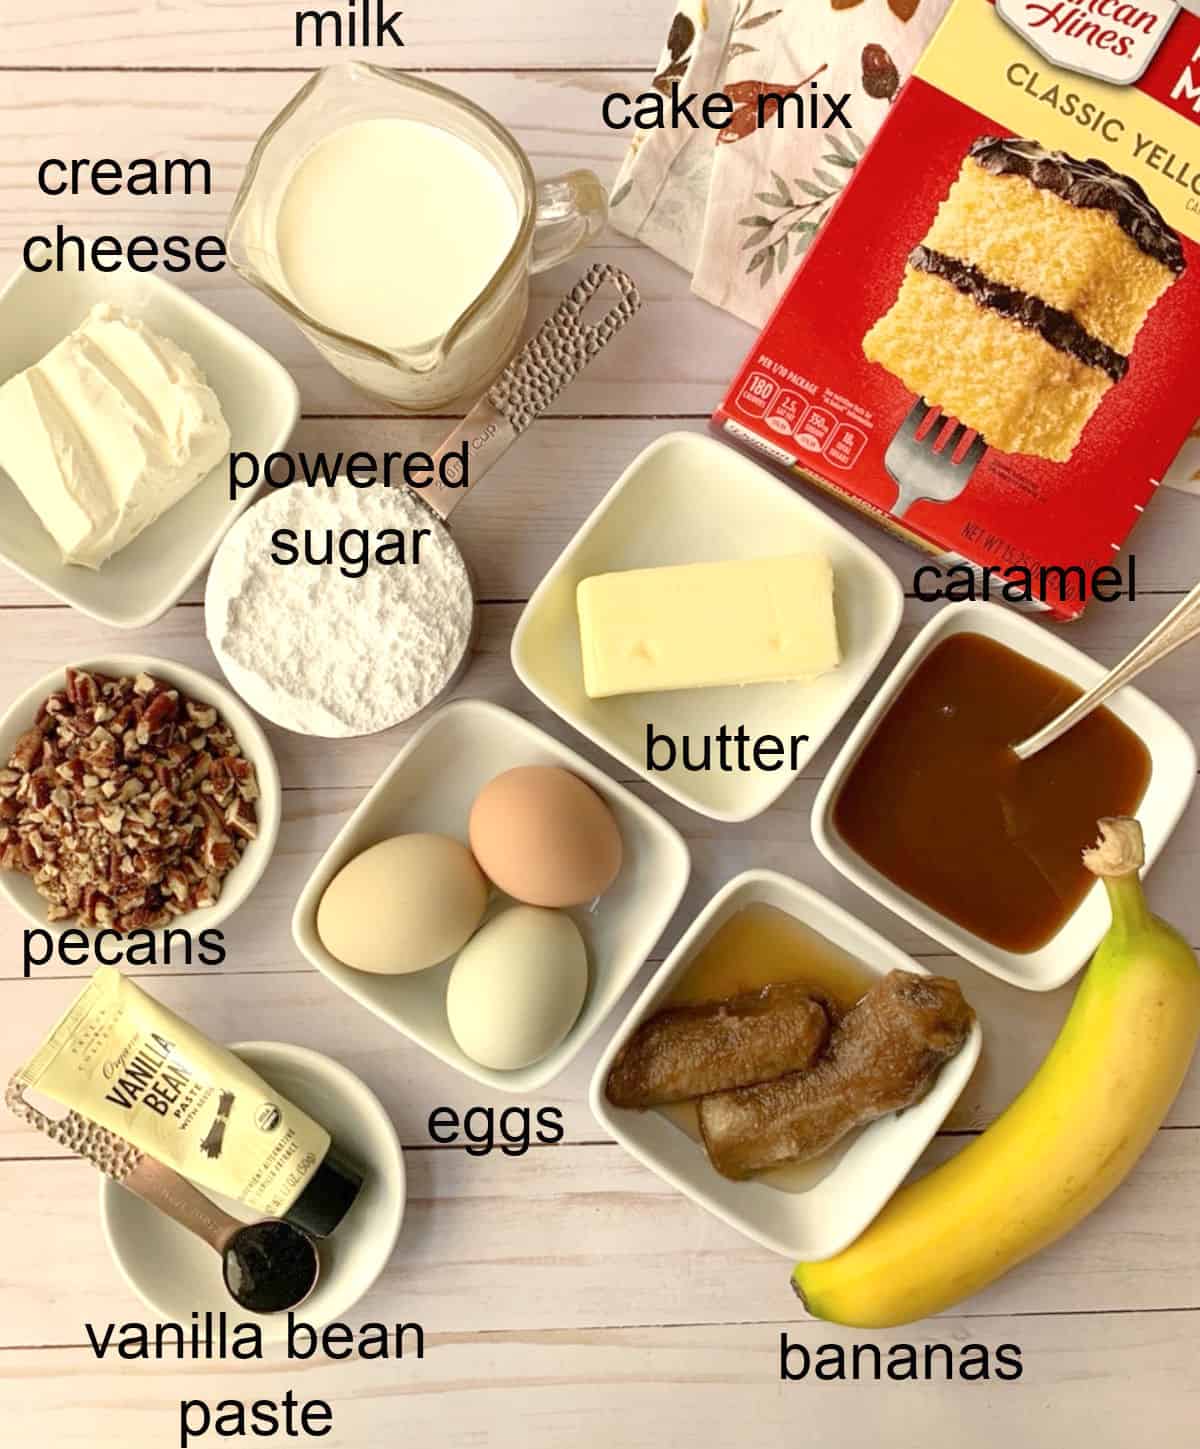 Ingredients for a banana cake.